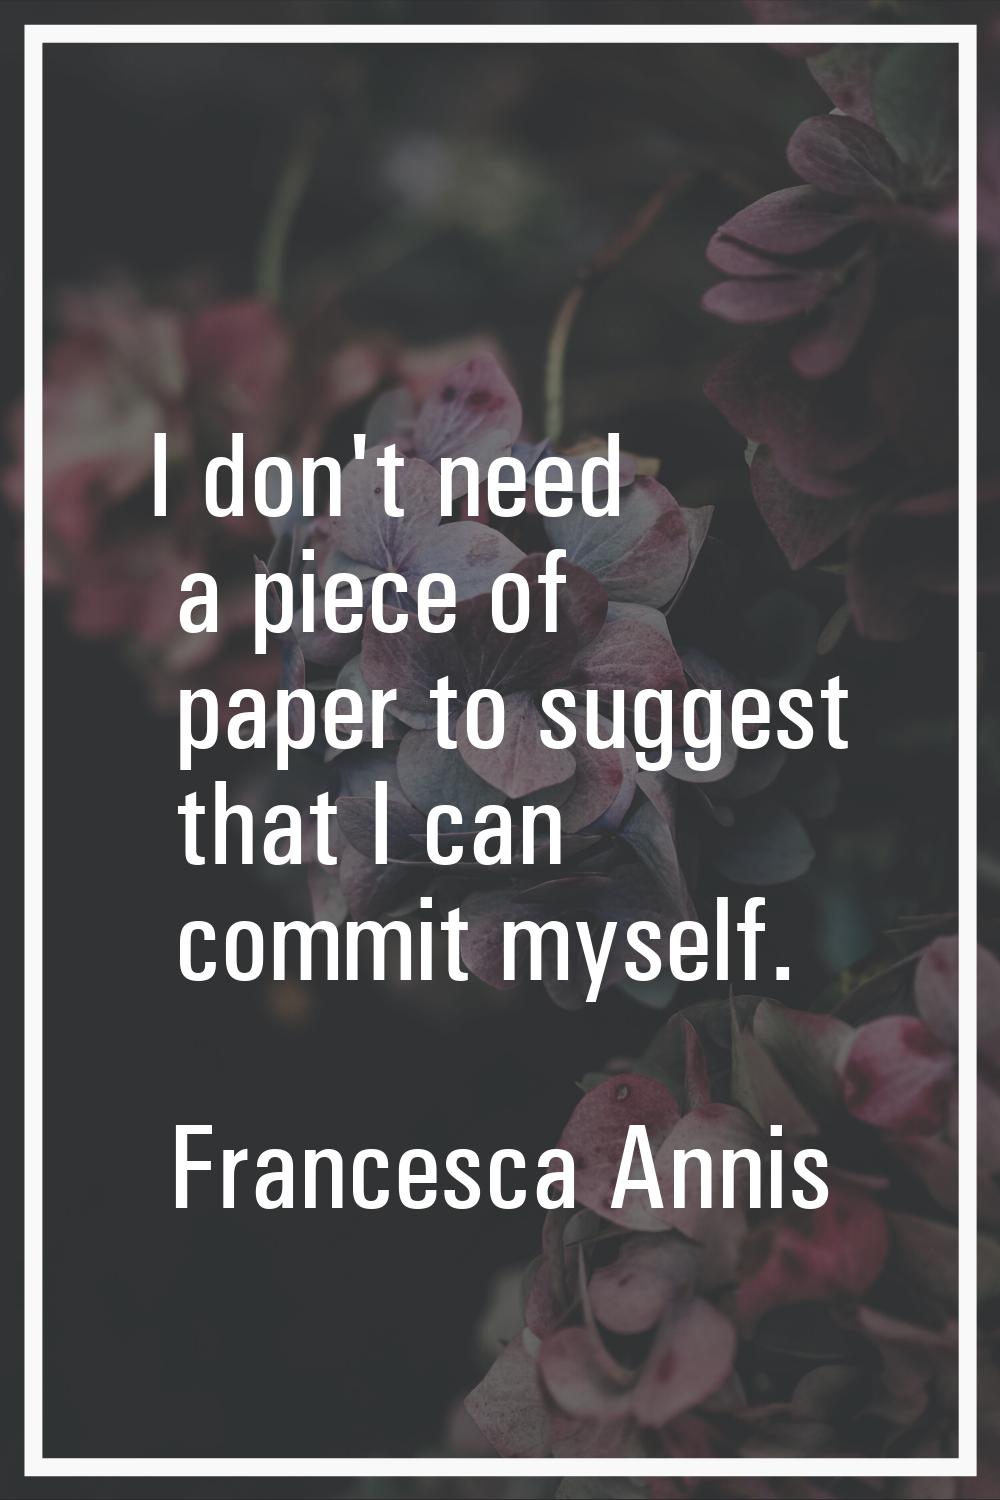 I don't need a piece of paper to suggest that I can commit myself.